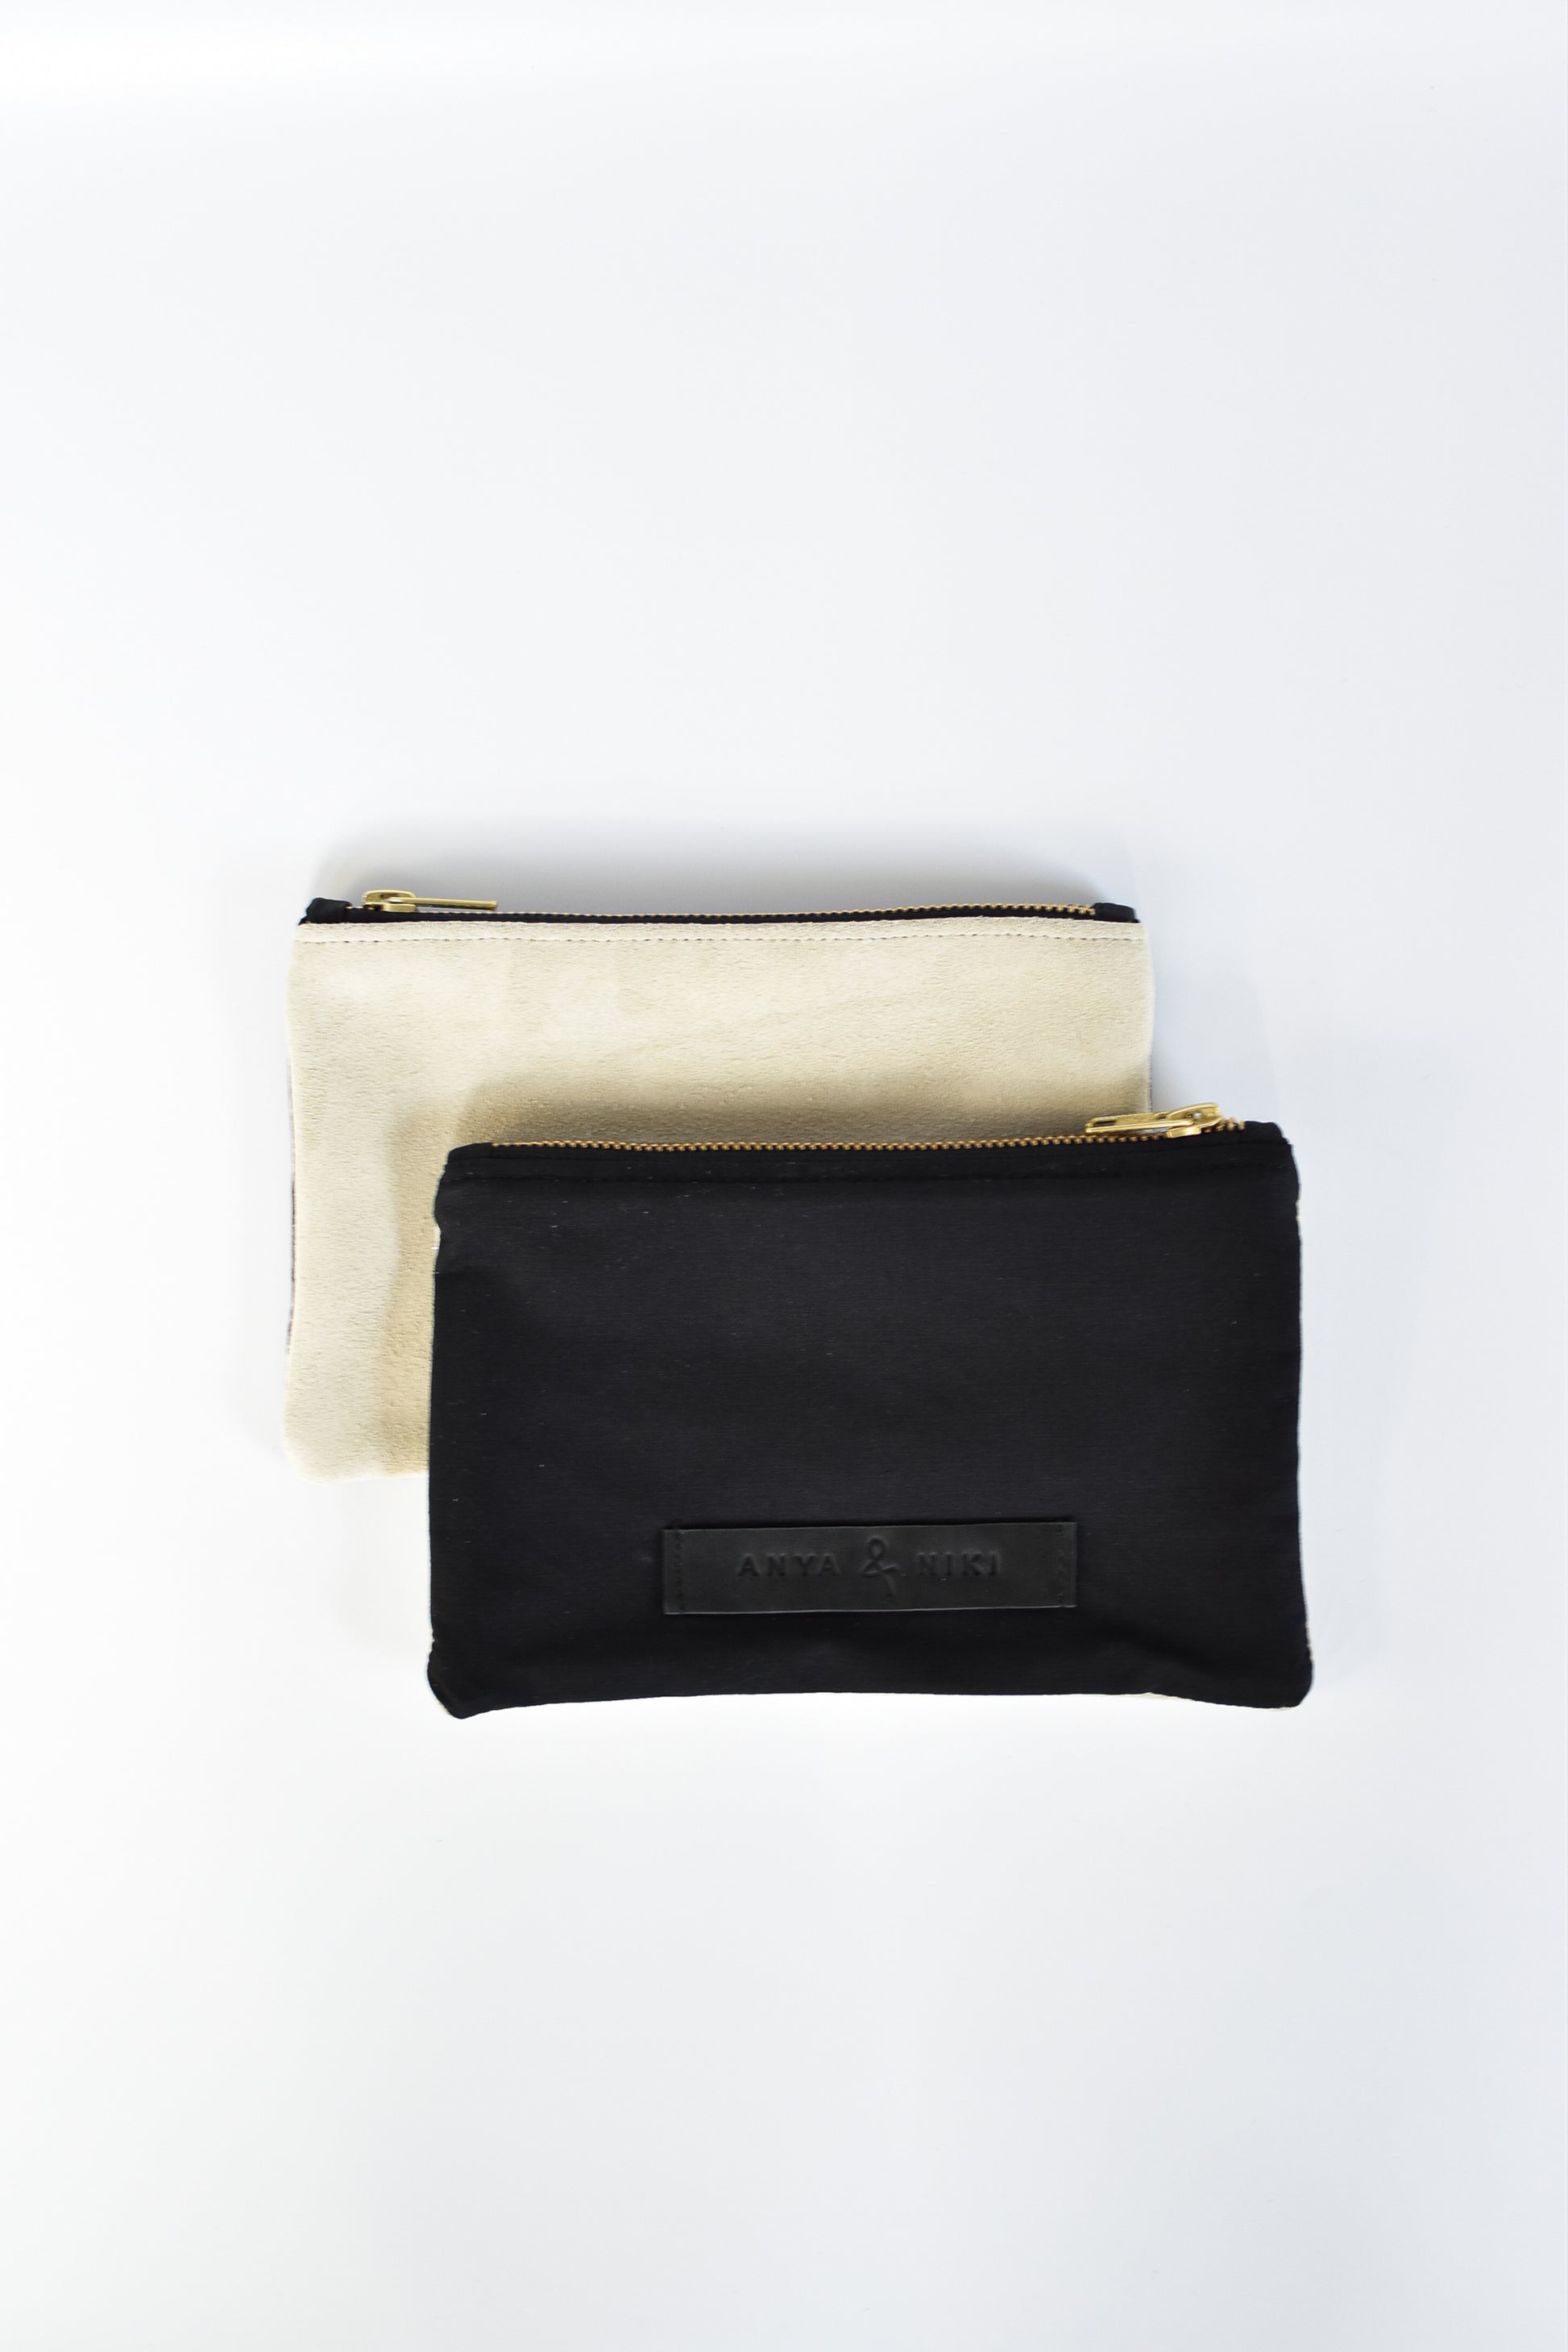 Black cotton canvas and off-white suede small pouch with brass zipper and leather logo label.